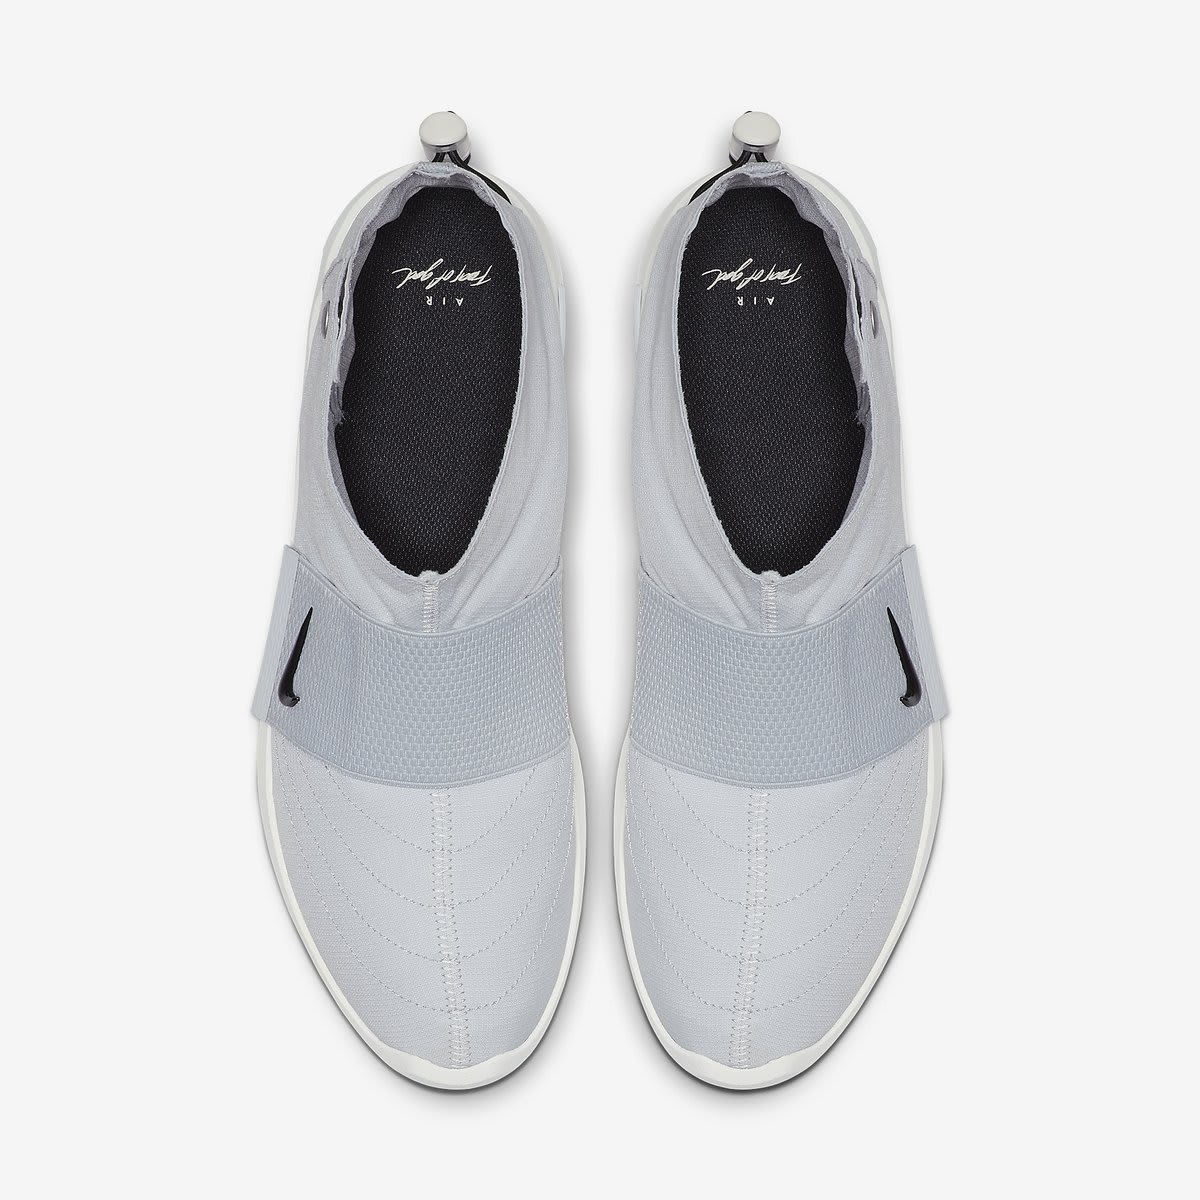 NIKE Fear of God Moccasin Platinum 12 — Collective Will